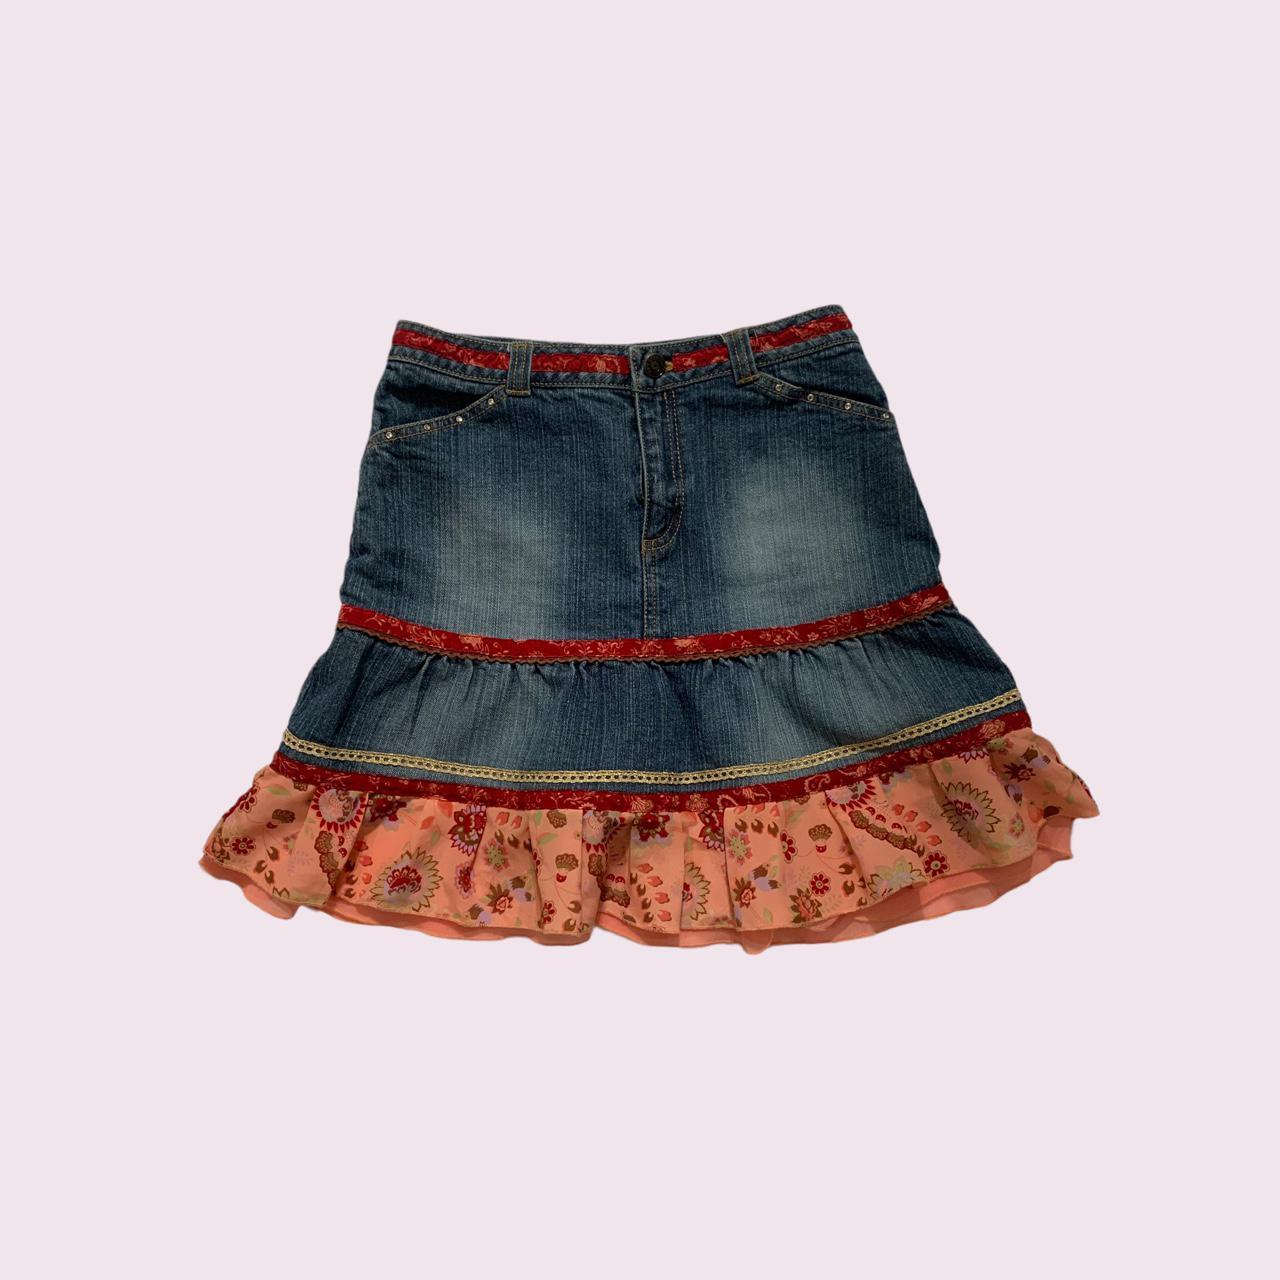 Mary Kate and Ashley denim and floral ruffle skirt,... - Depop